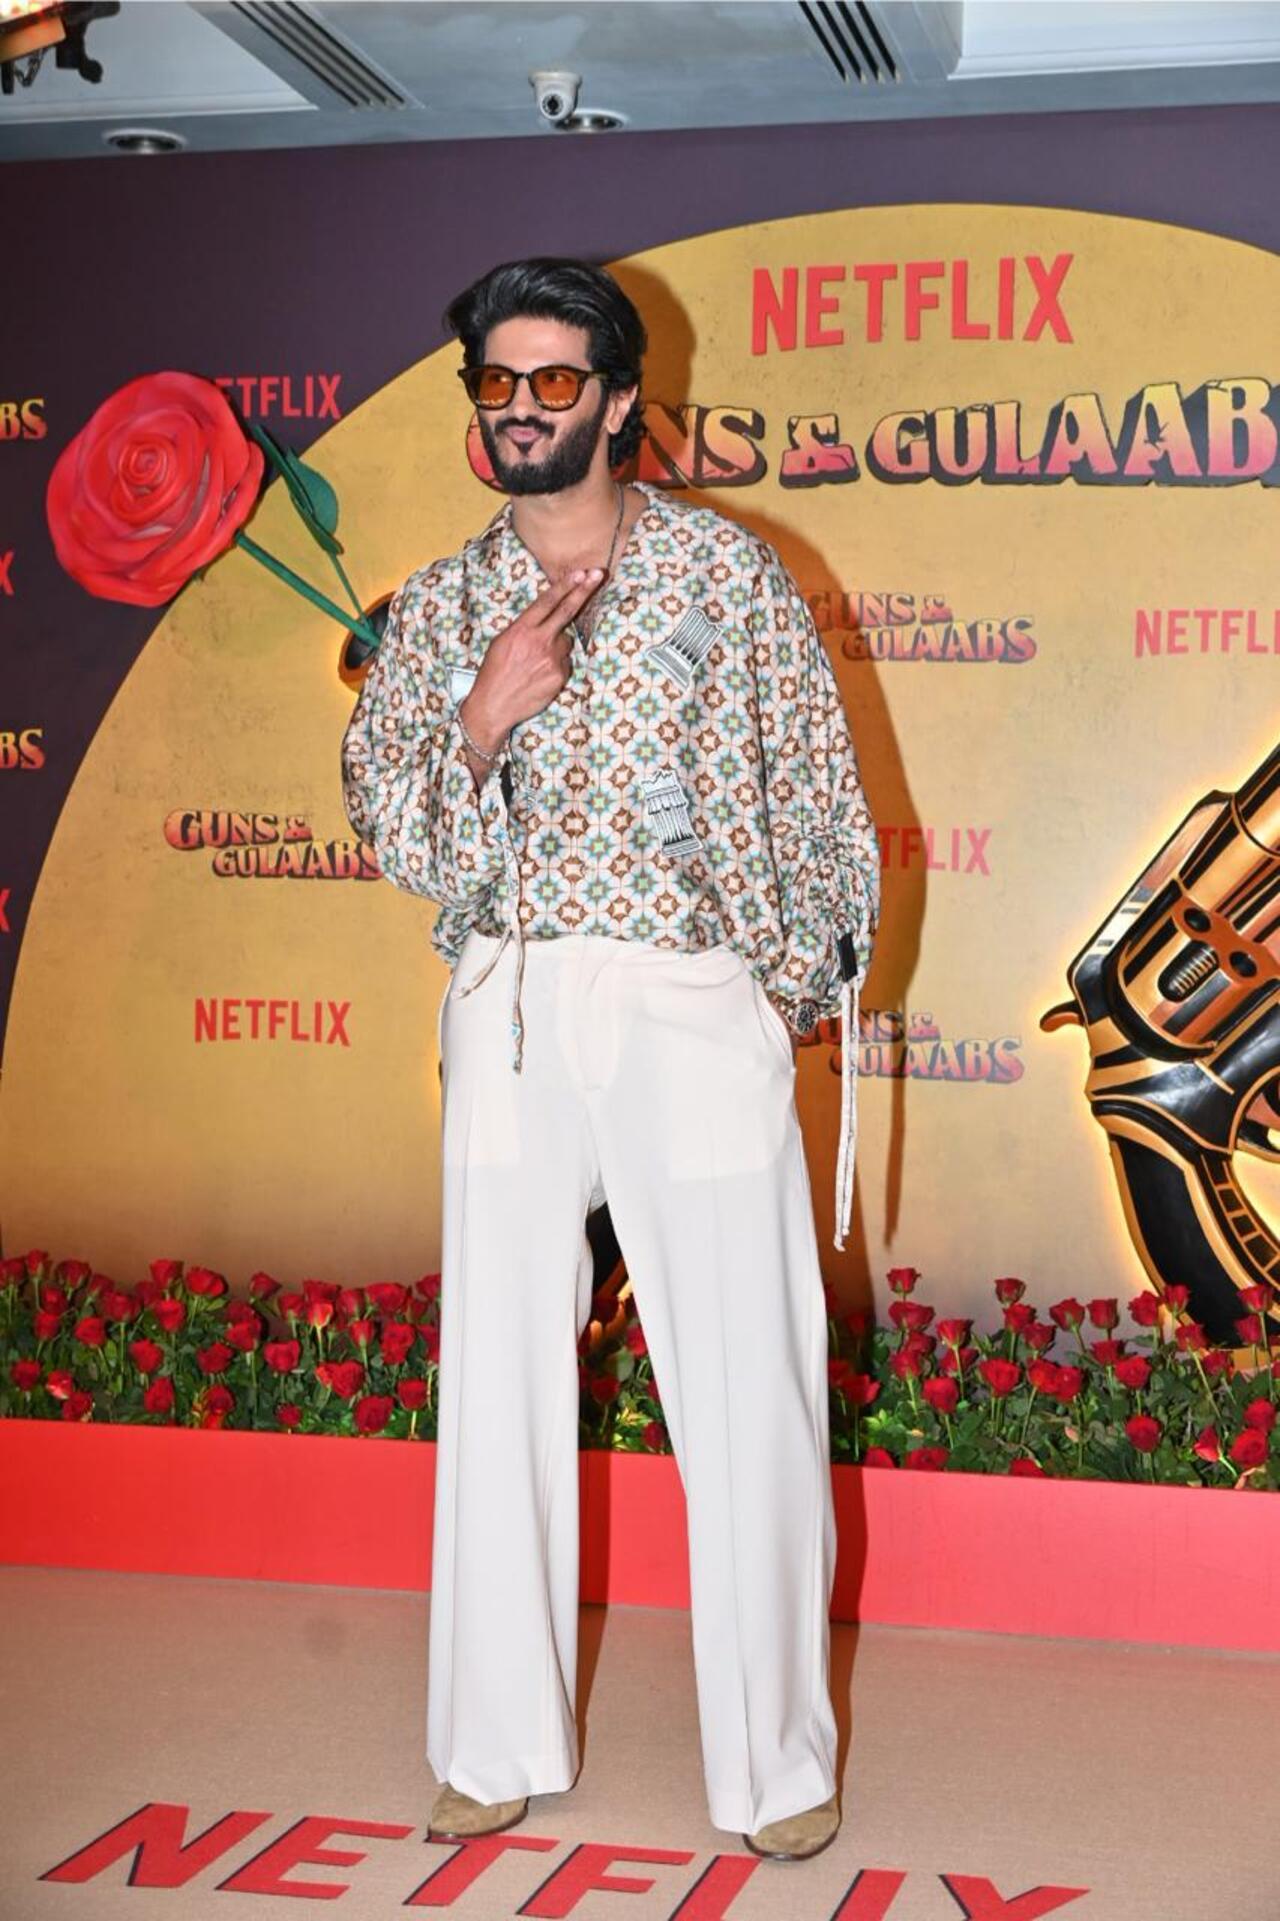 Dulquer Salmaan aced the retro look for the screening. The actor plays an investigator in the series